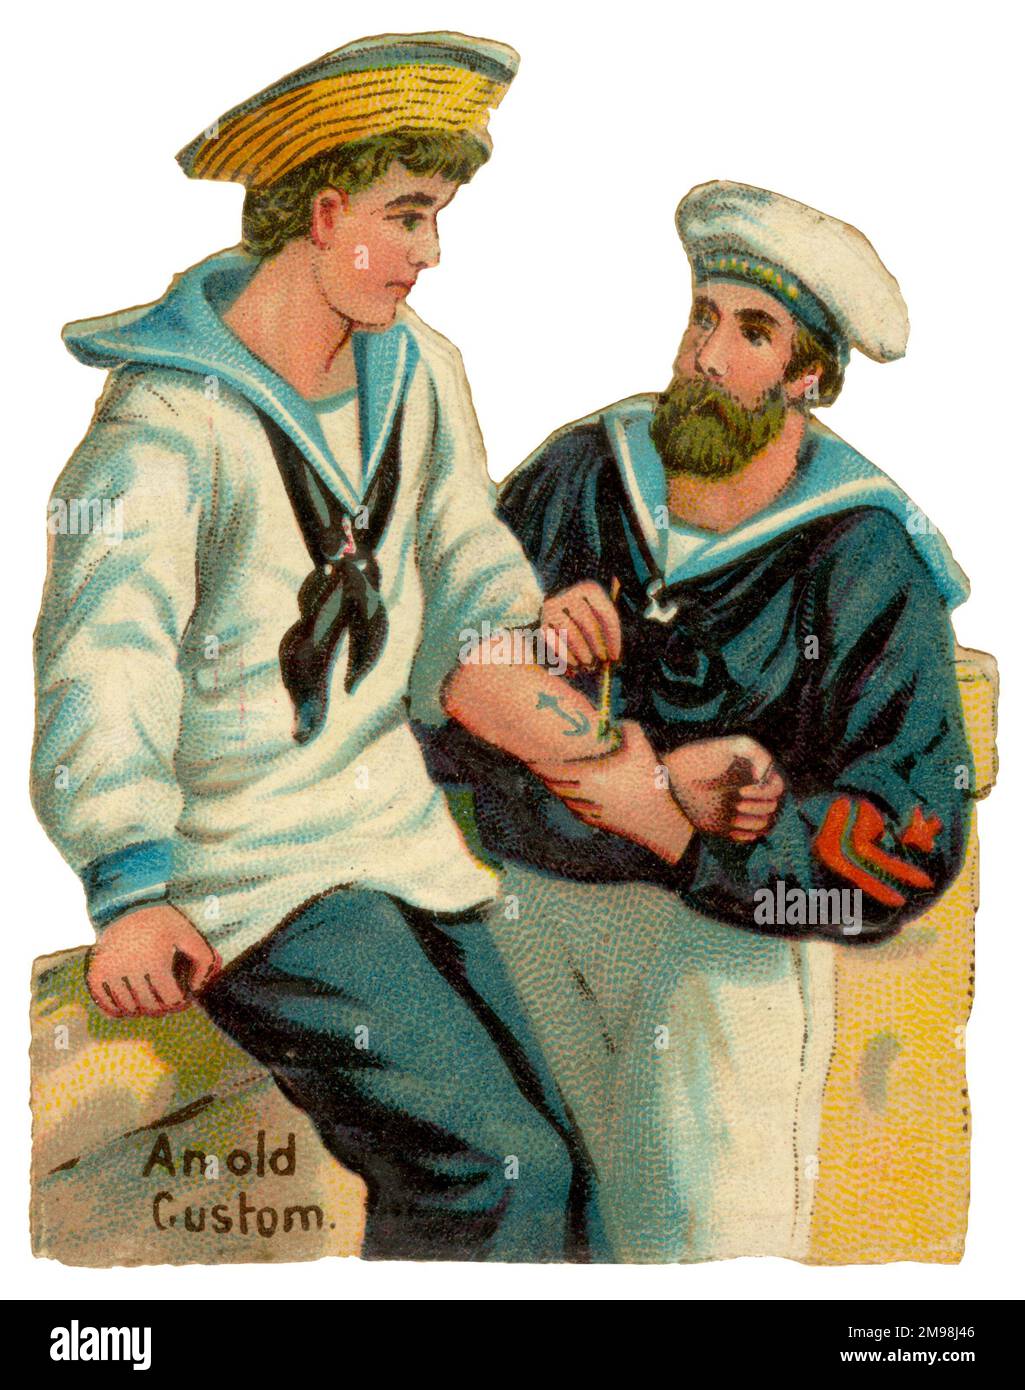 Victorian Scrap - Tattooing - an old custom in the navy. Stock Photo